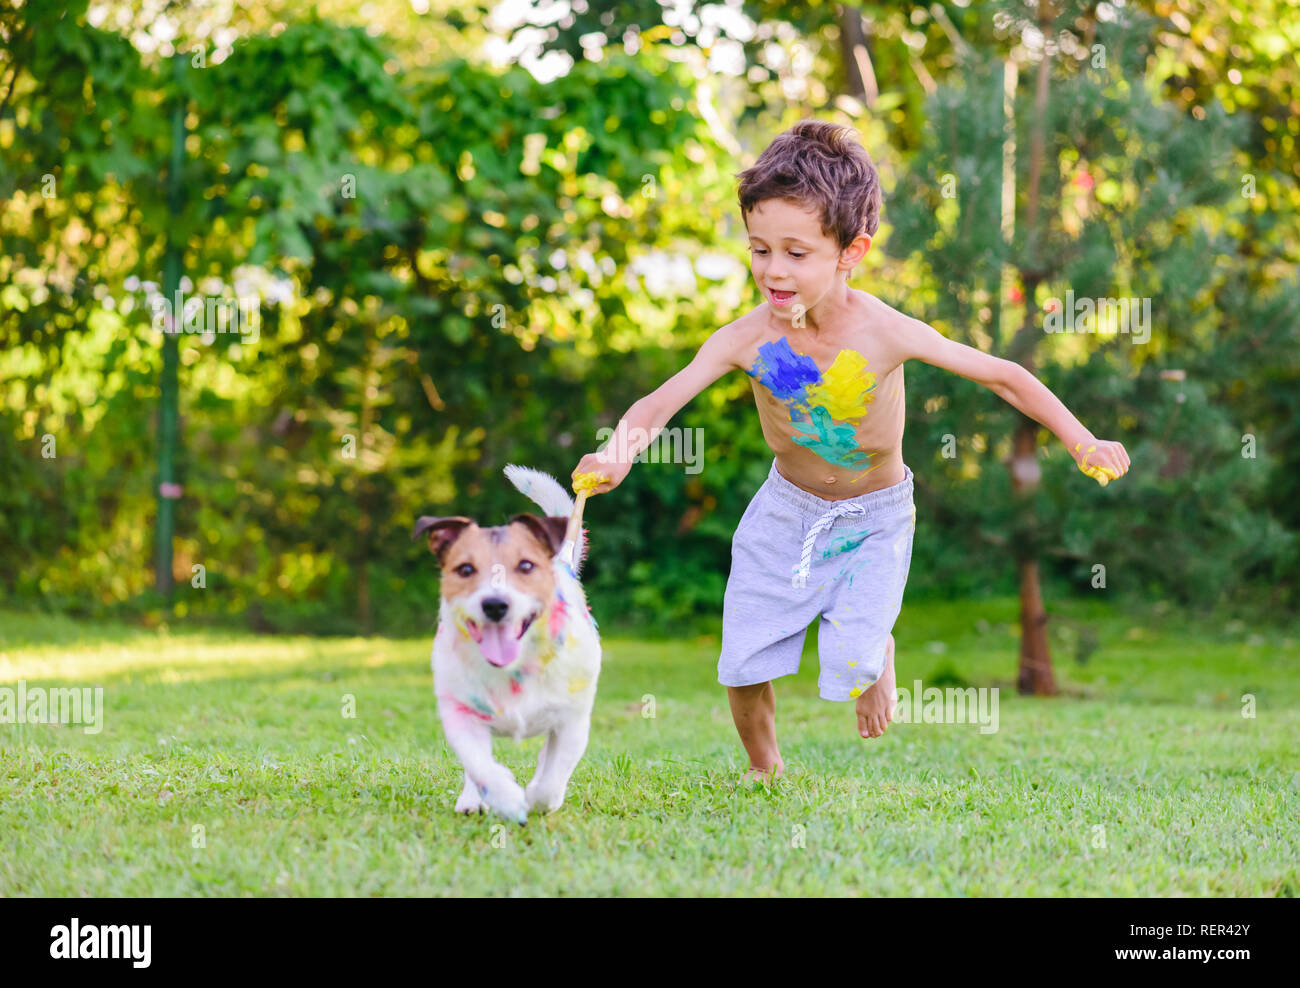 Naughty boy painting with brush on dog trying to escape Stock Photo